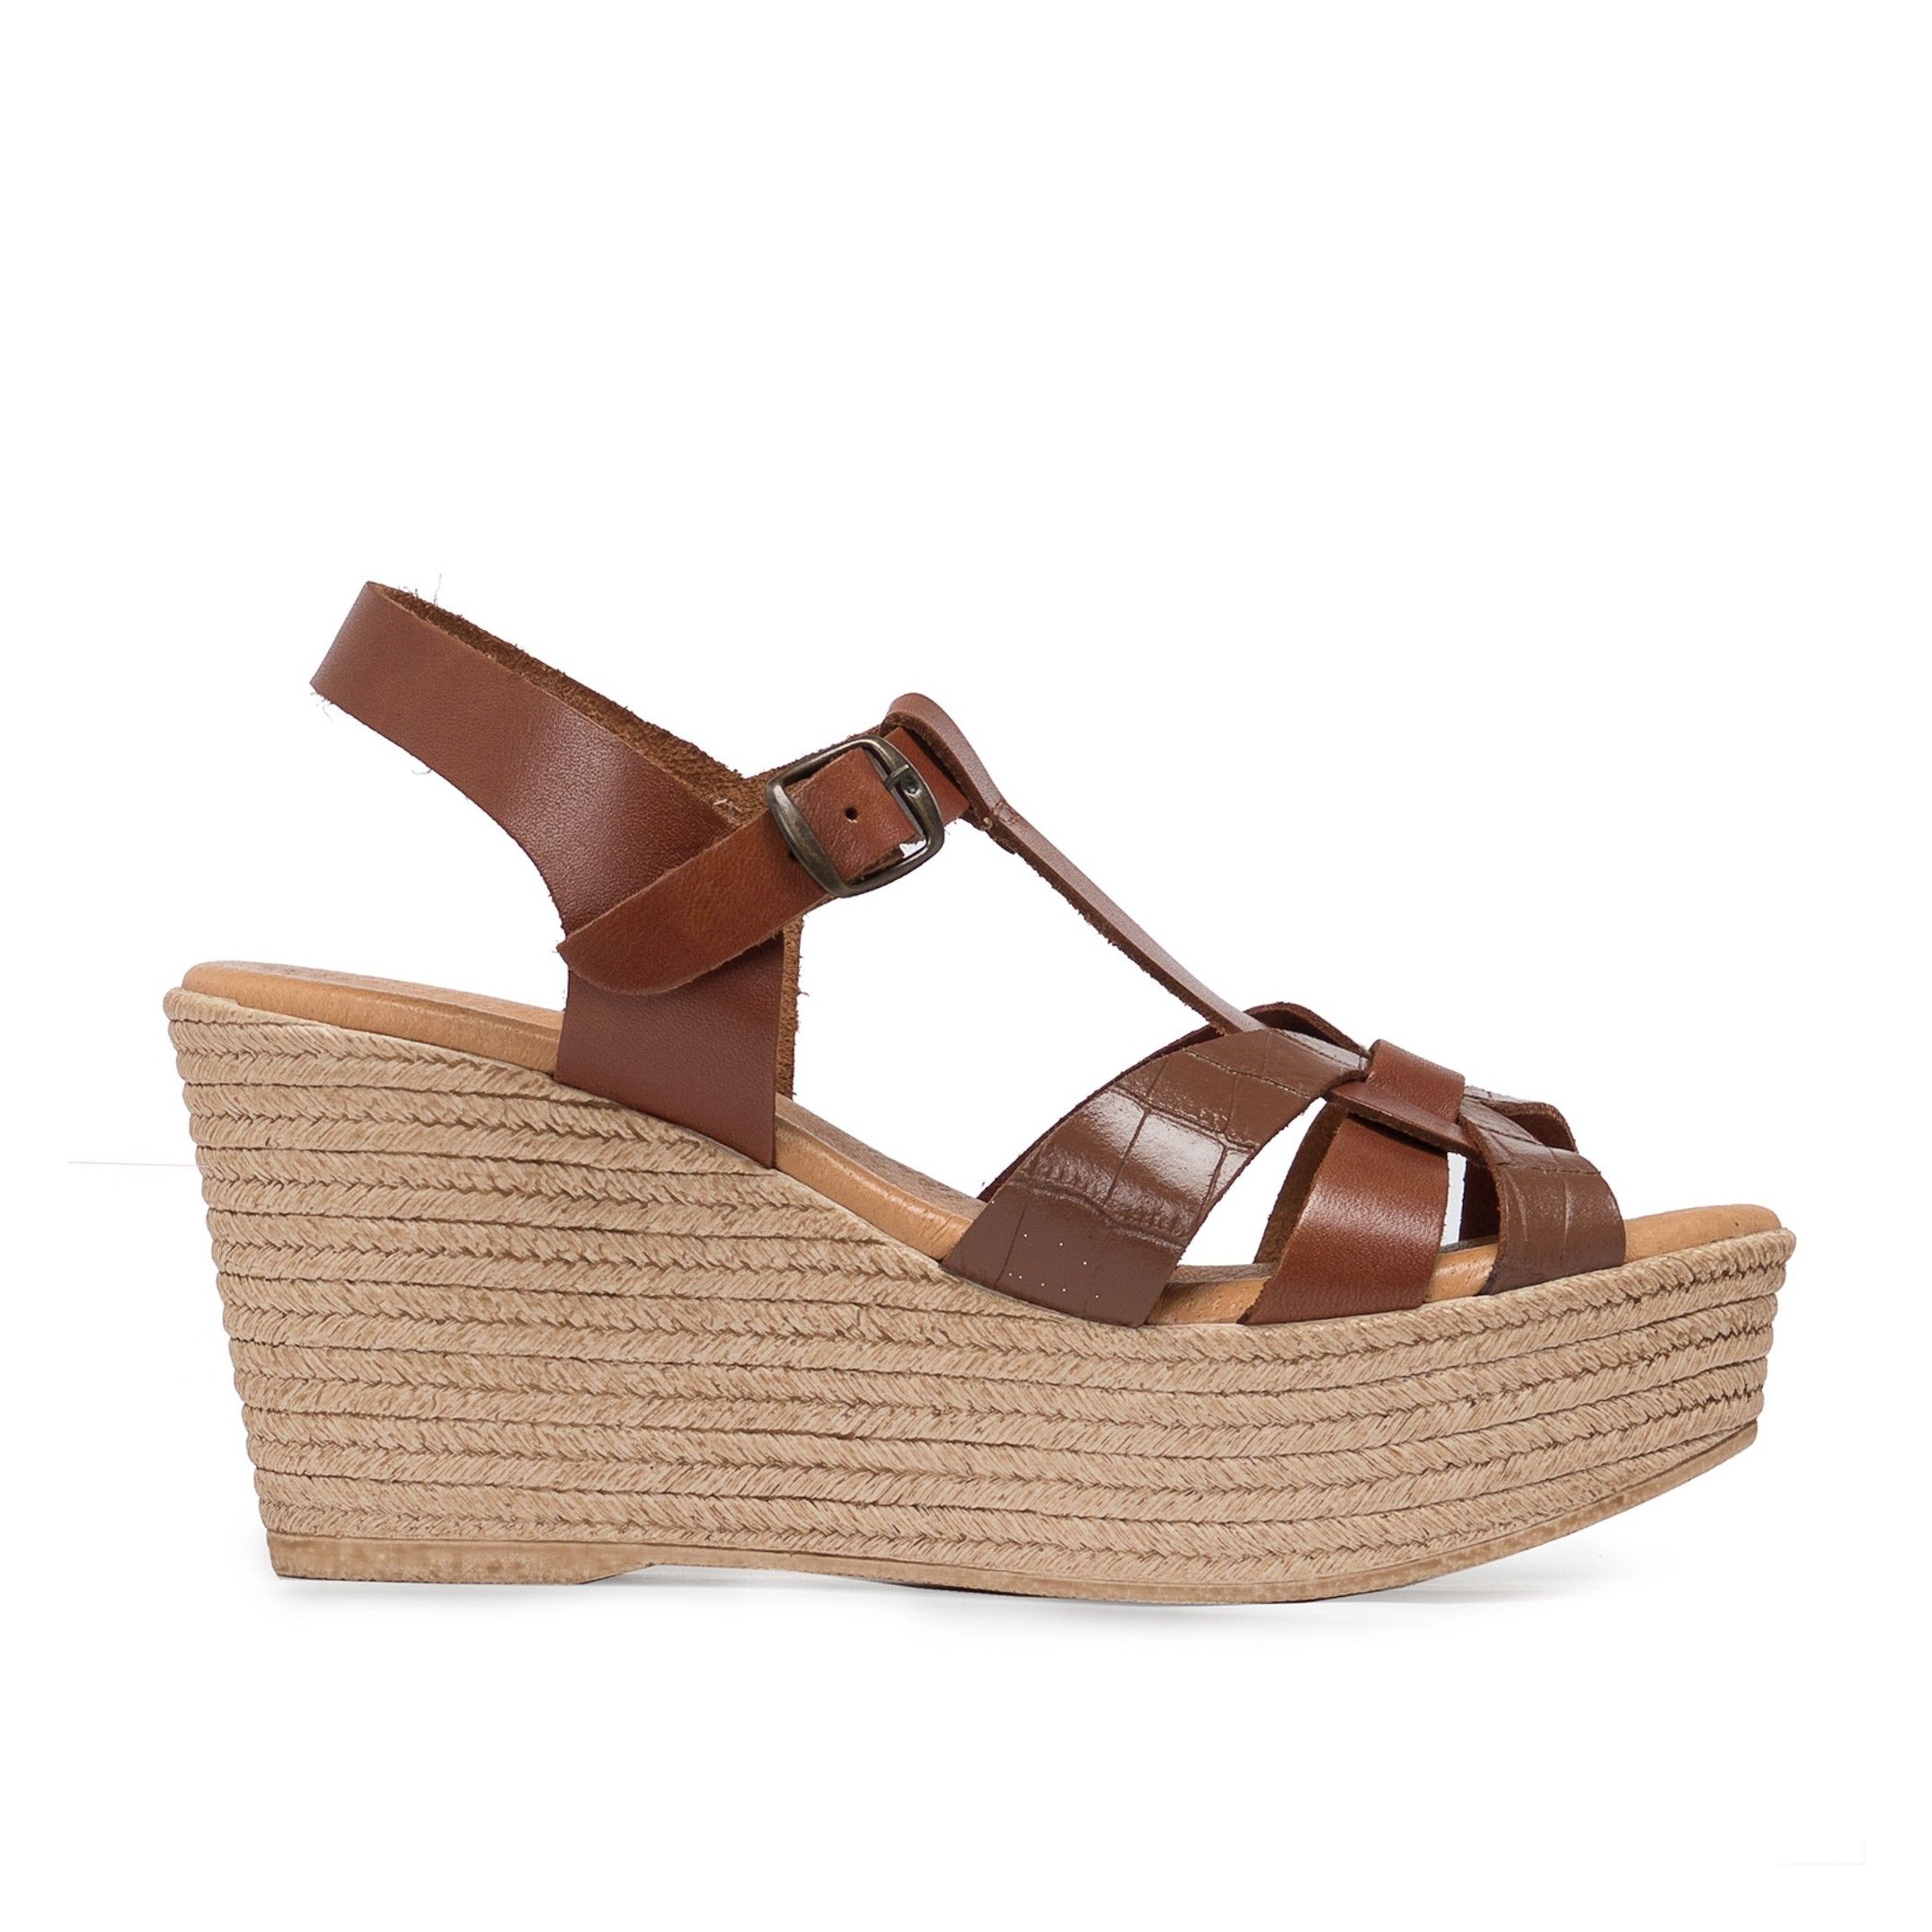 High wedge sandals, by María Barceló Shoes. Upper: cowhide leather. Closure: Metal buckle. Inner lining and insole: pig lining. Padded sole: 0,5 cm. Sole material: 100%, lightweight and non-slip. Heel height: 8'5 cm. Platform 3 cm. Designed and made in Spain.